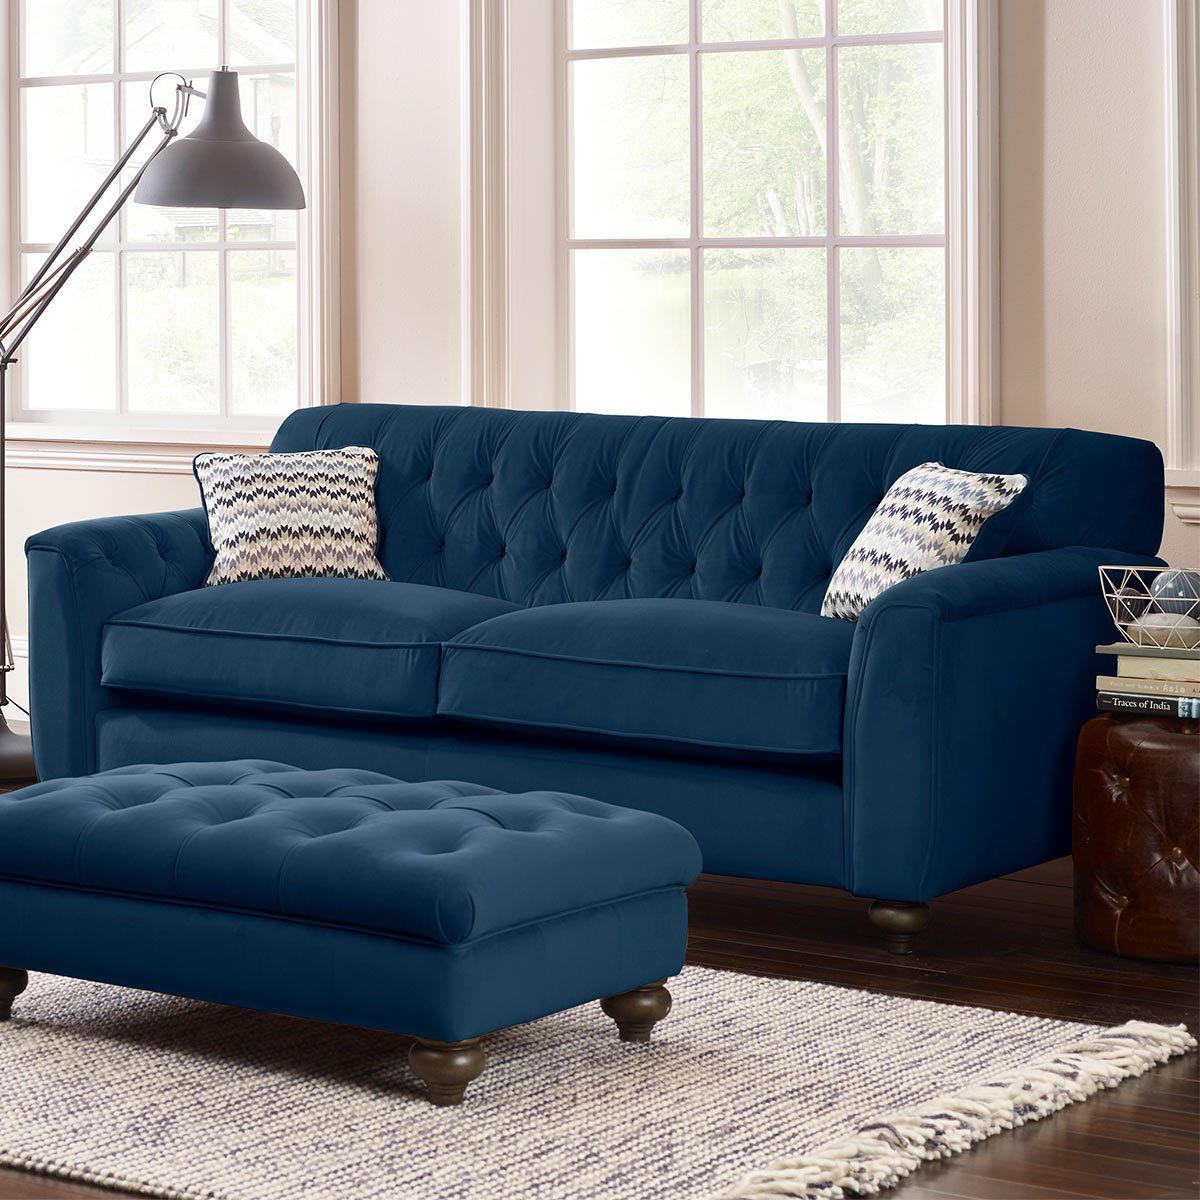 Avante Button Back 4 Seater Velvet Sofa With 2 Accent Throughout Lyvia Pillowback Sofa Sectional Sofas (View 6 of 15)